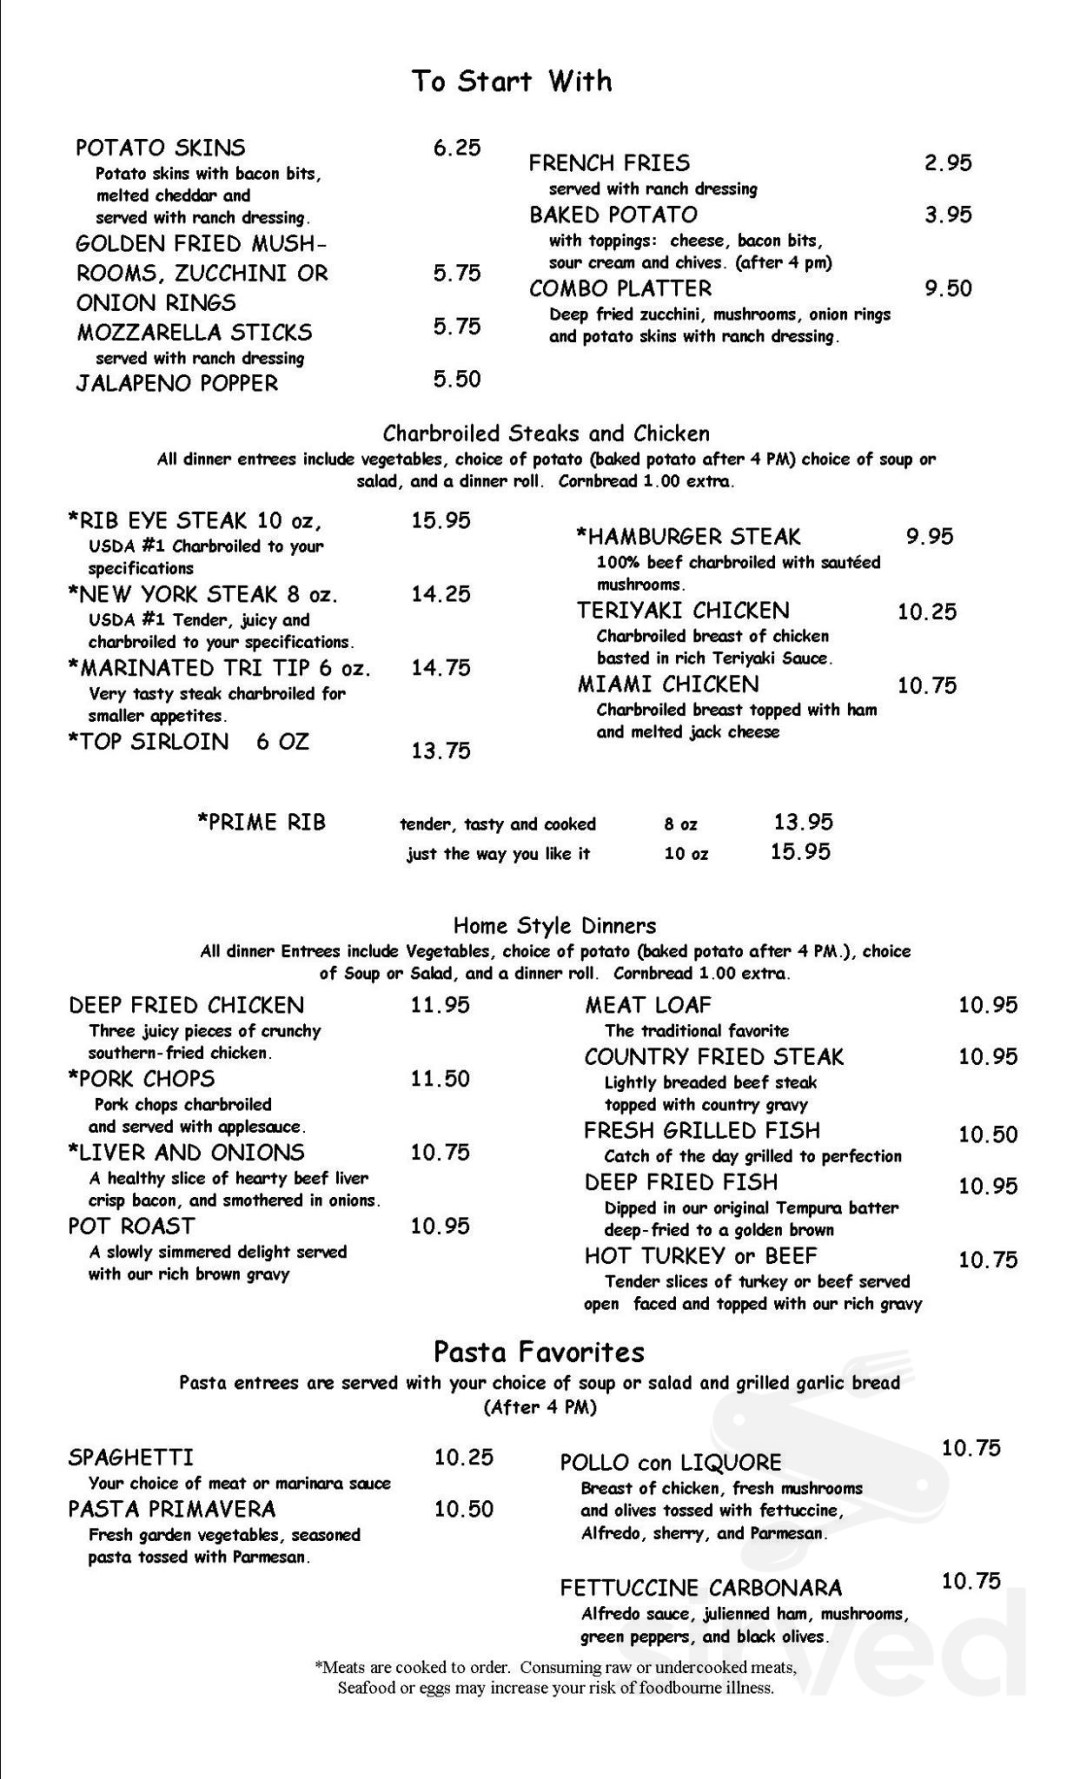 Picture of: Black Forest Family Restaurant menu in Grants Pass, Oregon, USA